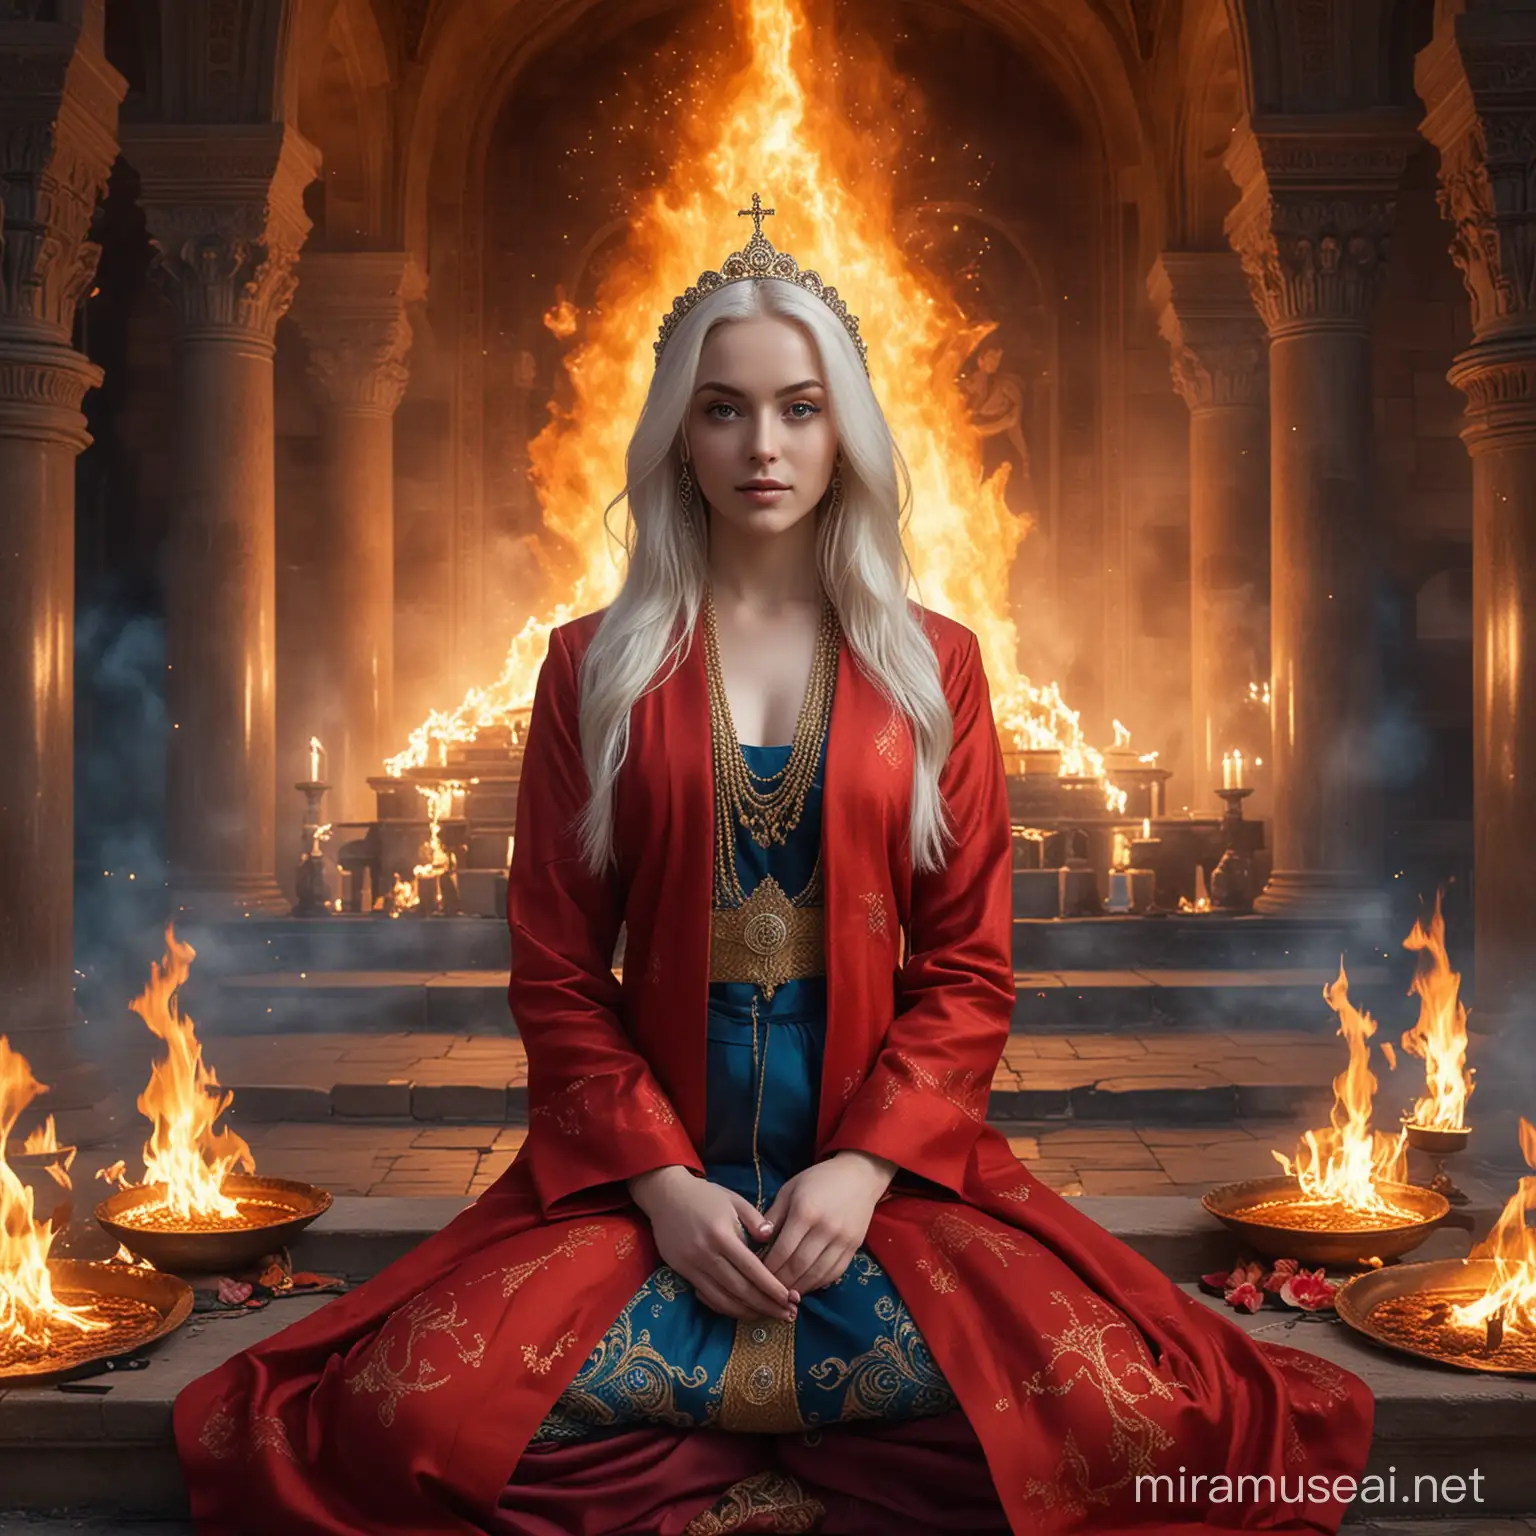 Divine Hindu Goddess Empress Surrounded by Fire